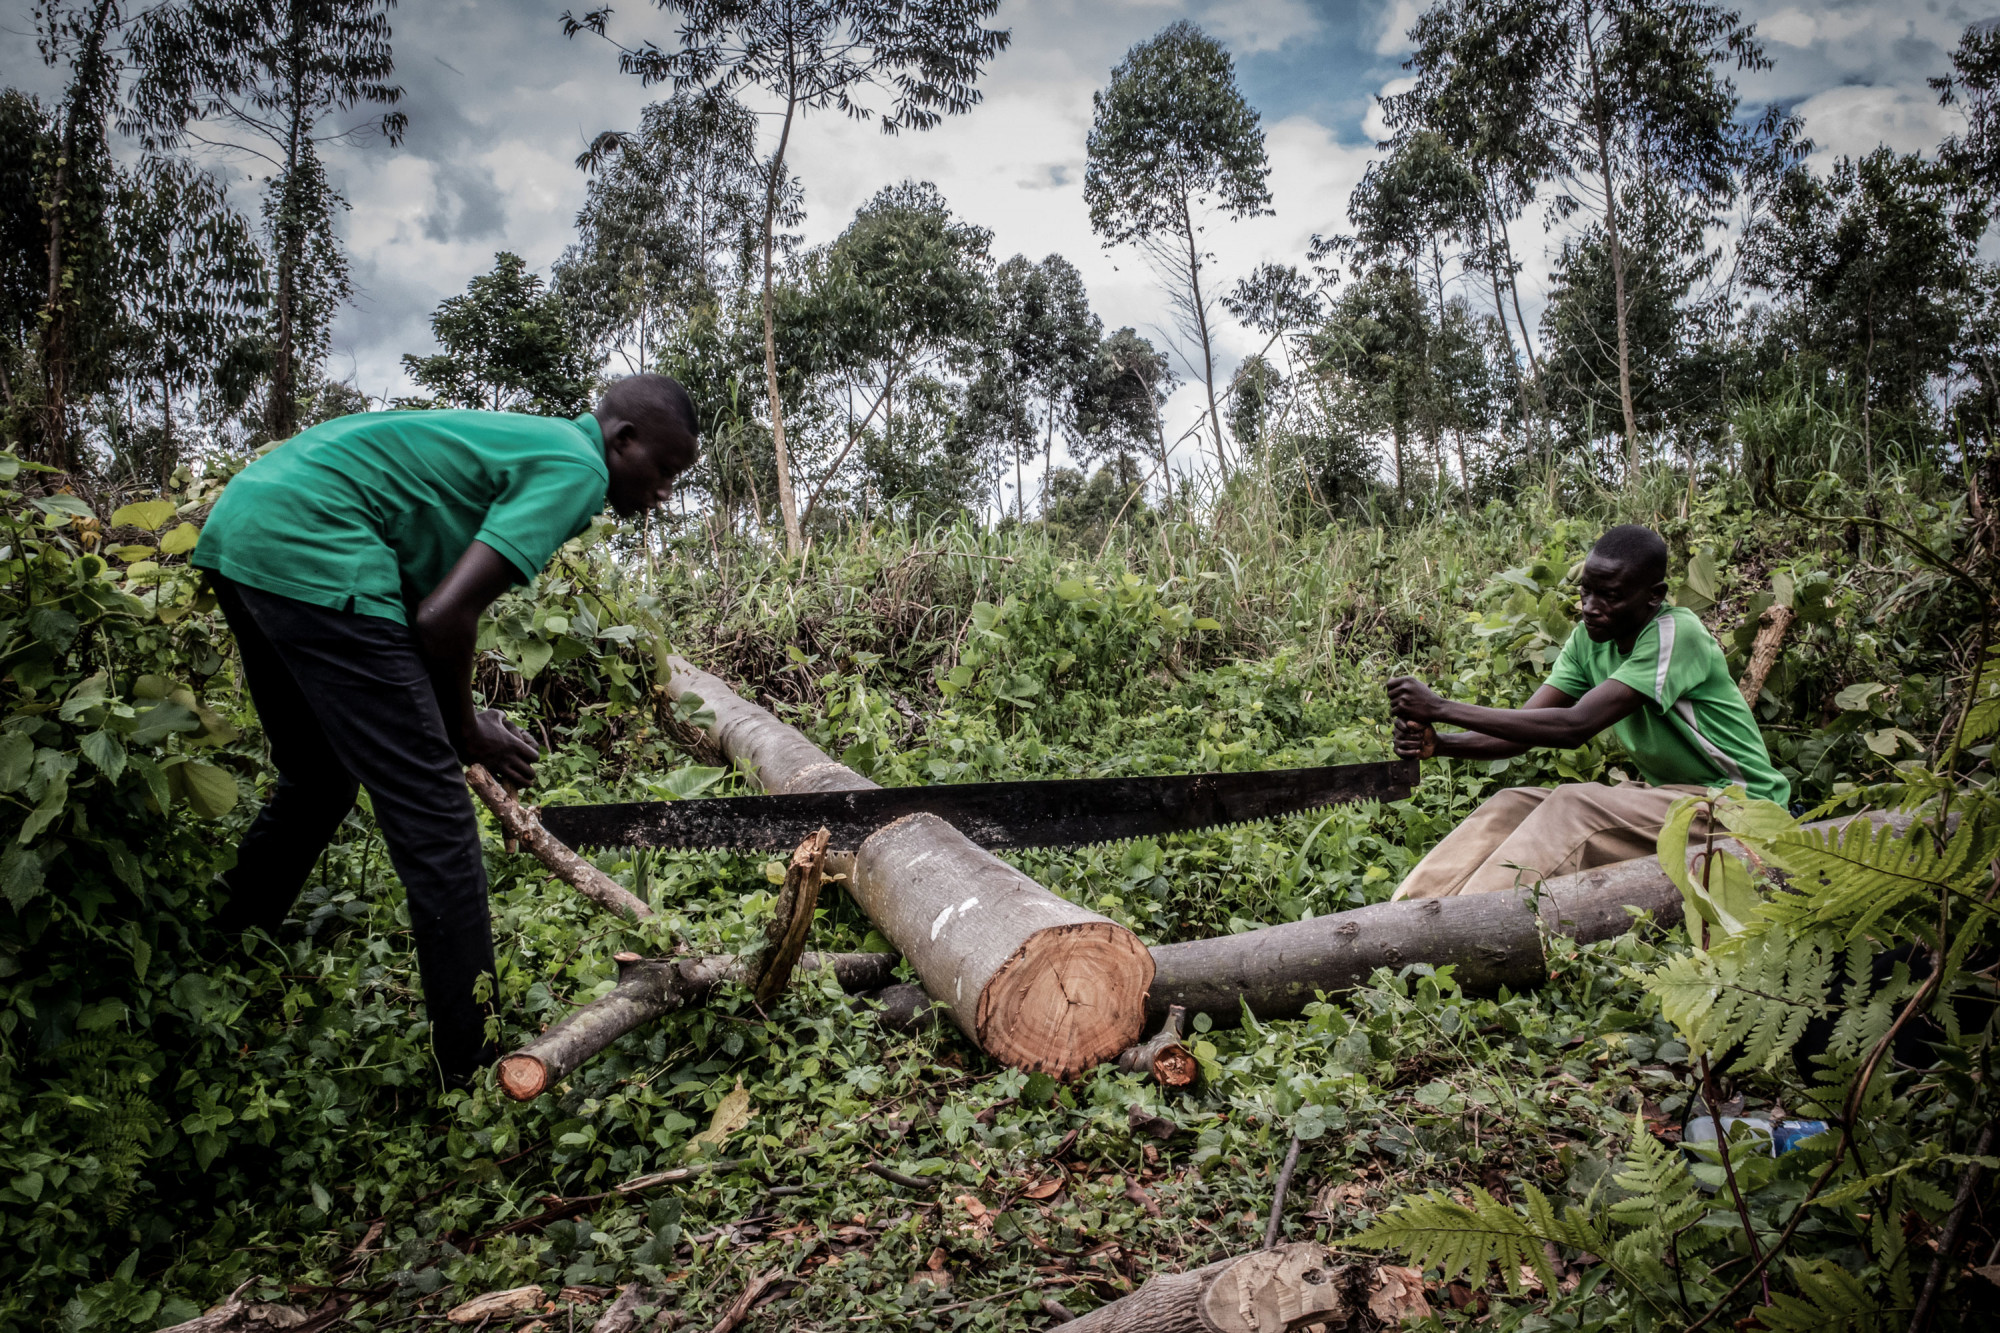 Virunga National Park, DRC, November 2020. Men chop and cut a tree to make charcoal on a swathe of deforested land near the village of Rusayo on the edge of Virunga National Park just north of the eastern Congolese city of Goma. © Guerchom Ndebo for Fondation Carmignac